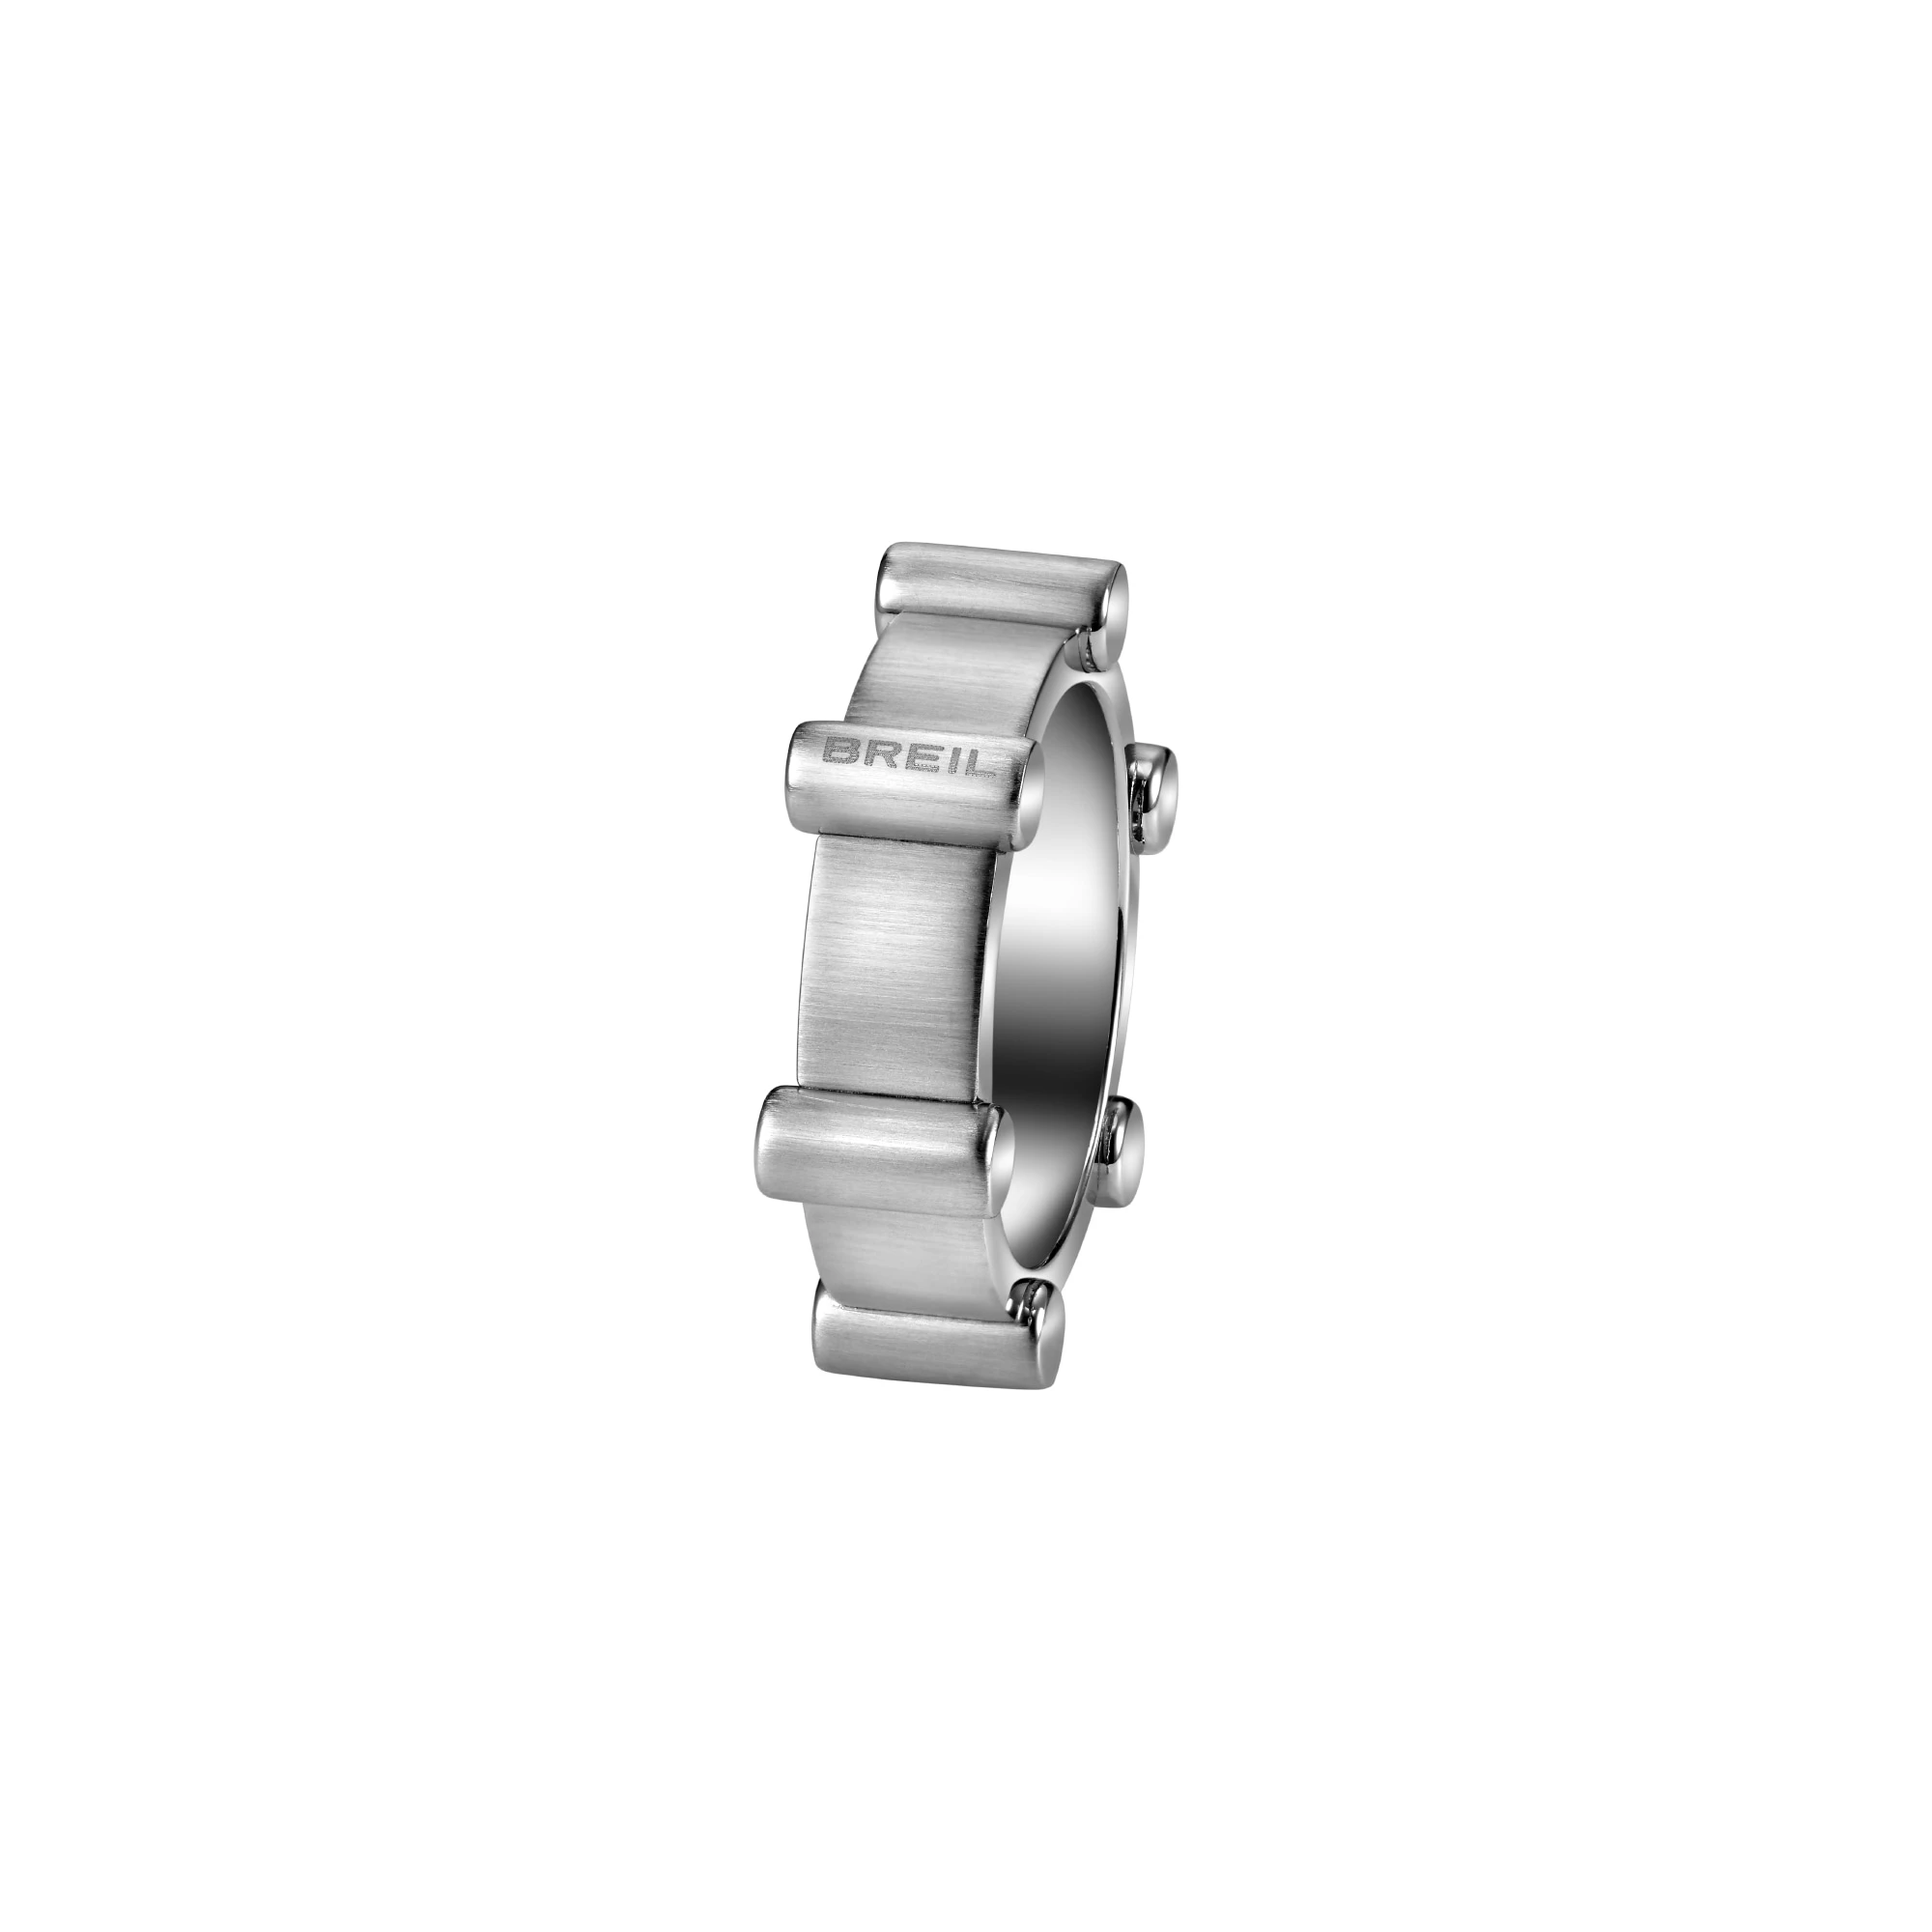 BULLET - Men's polished and satin stainless steel ring - 1 - TJ1711 | Breil